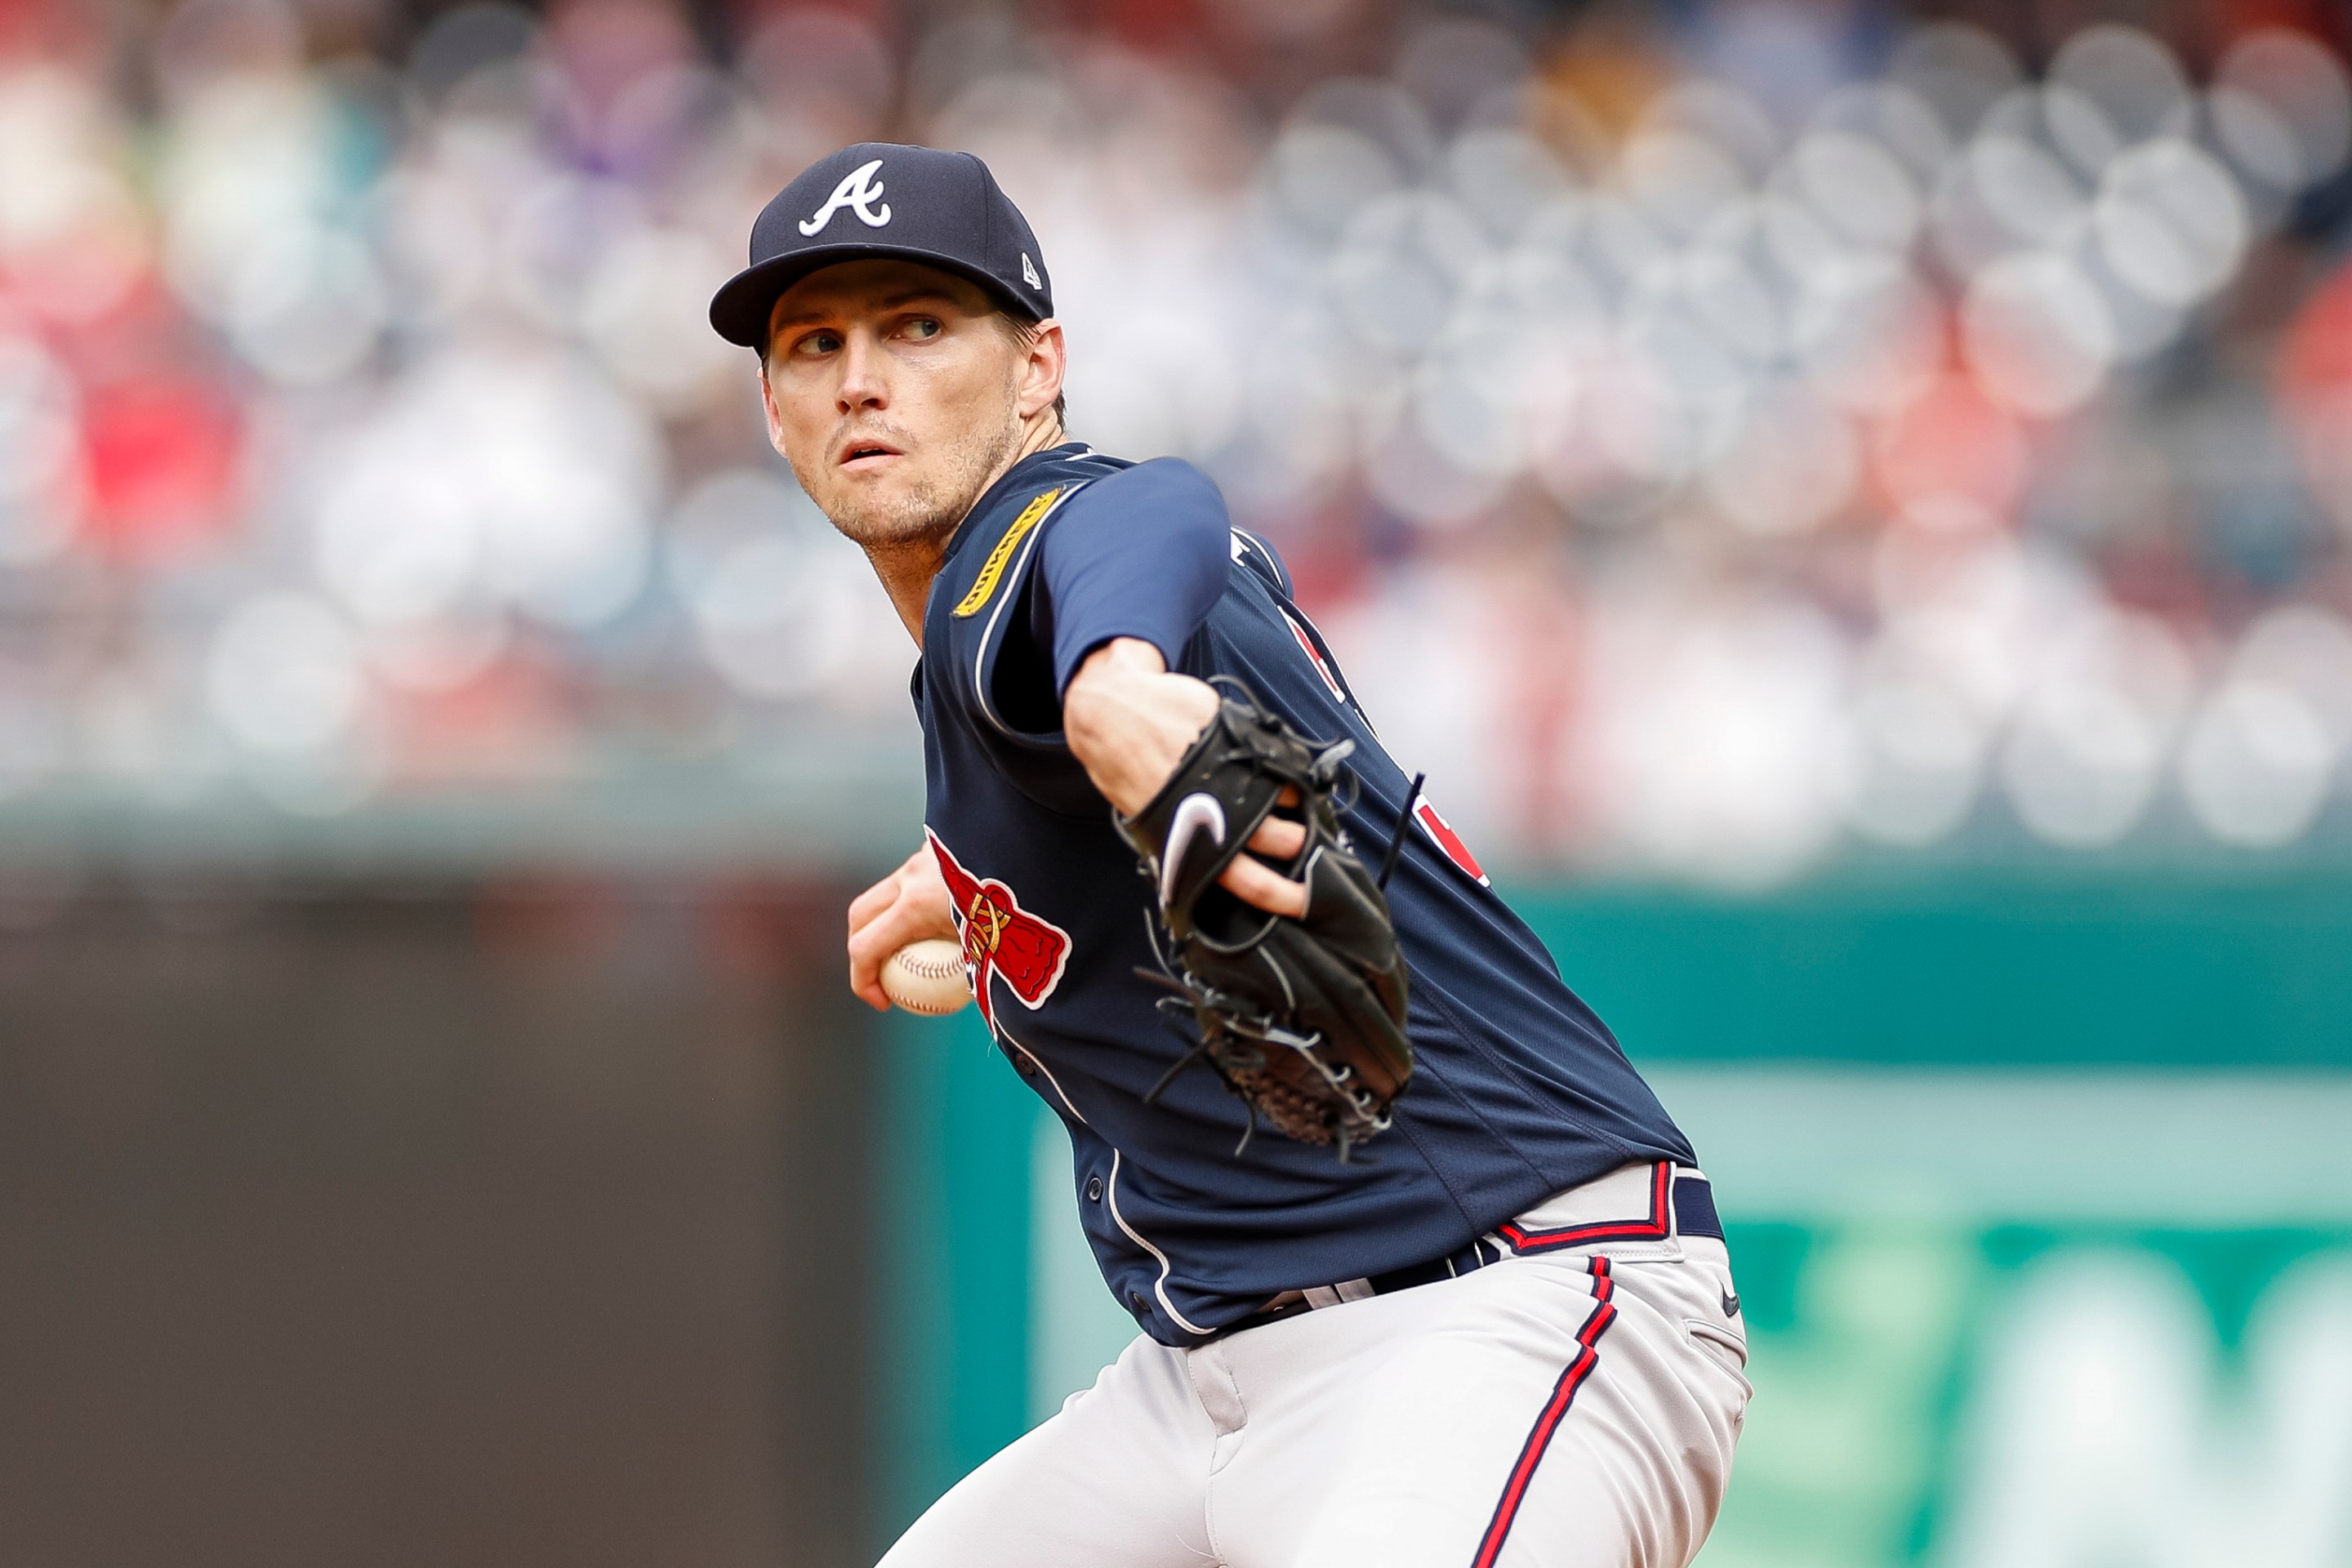 Atlanta Braves pitcher Kyle Wright throwing a pitch against the Washington Nationals in a September 2023 road game.